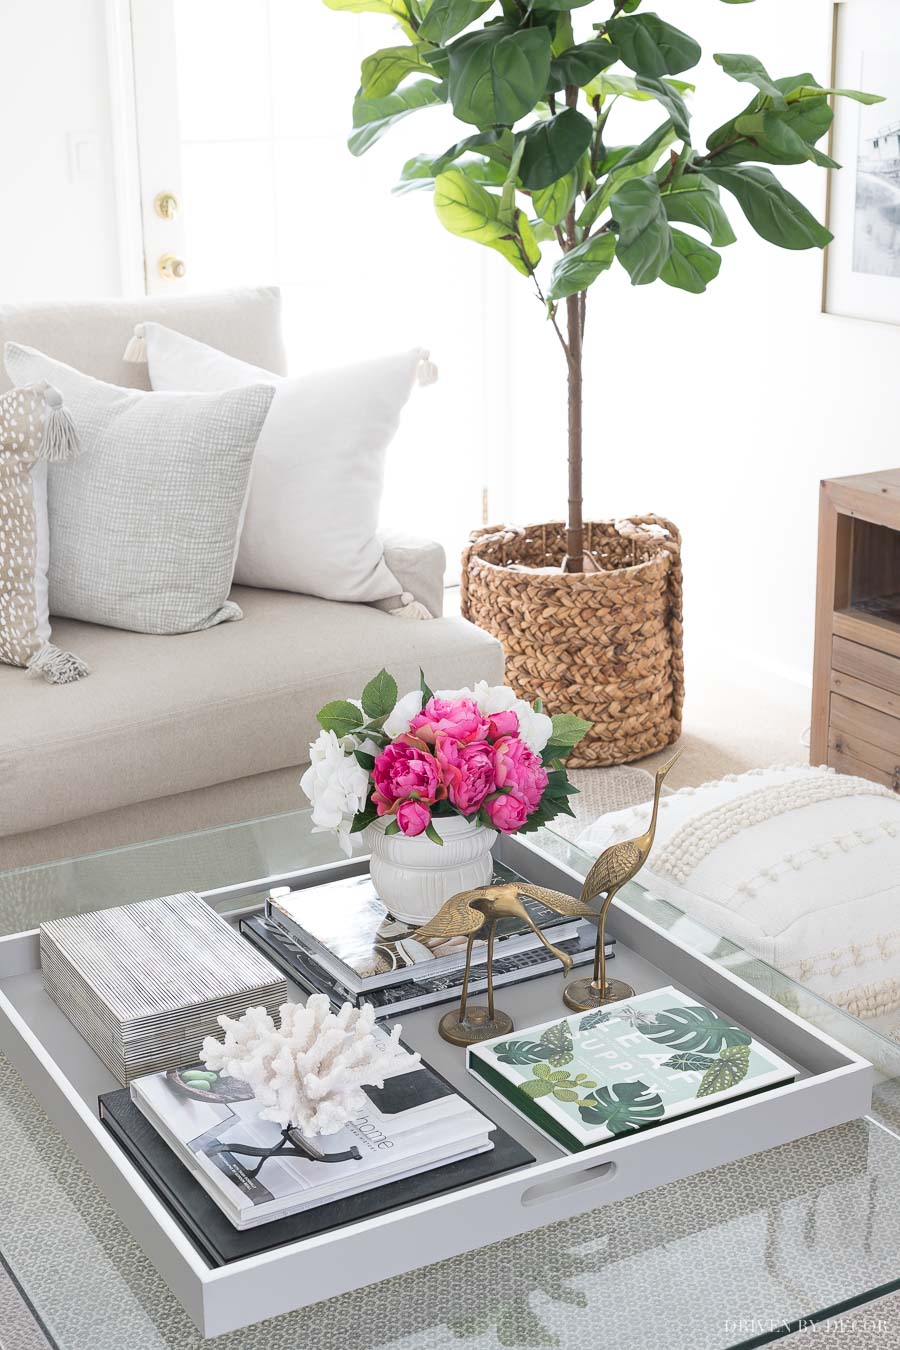 DESIGNER COFFEE TABLE BOOKS  MUST-HAVE FAVORITES + TIPS TO SAVE